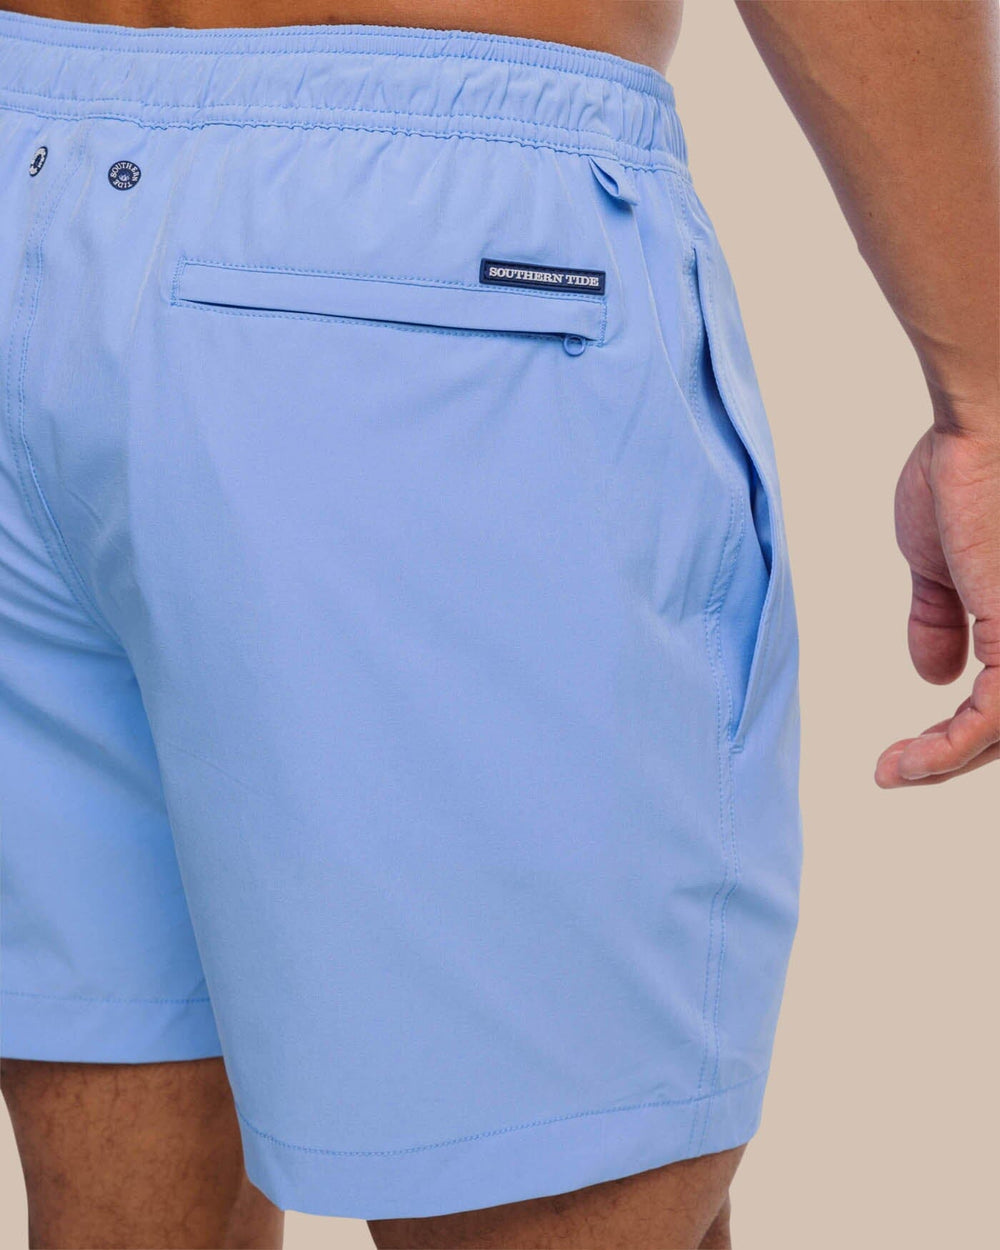 The detail view of the Southern Tide Solid Swim Trunk 3 by Southern Tide - Ocean Channel